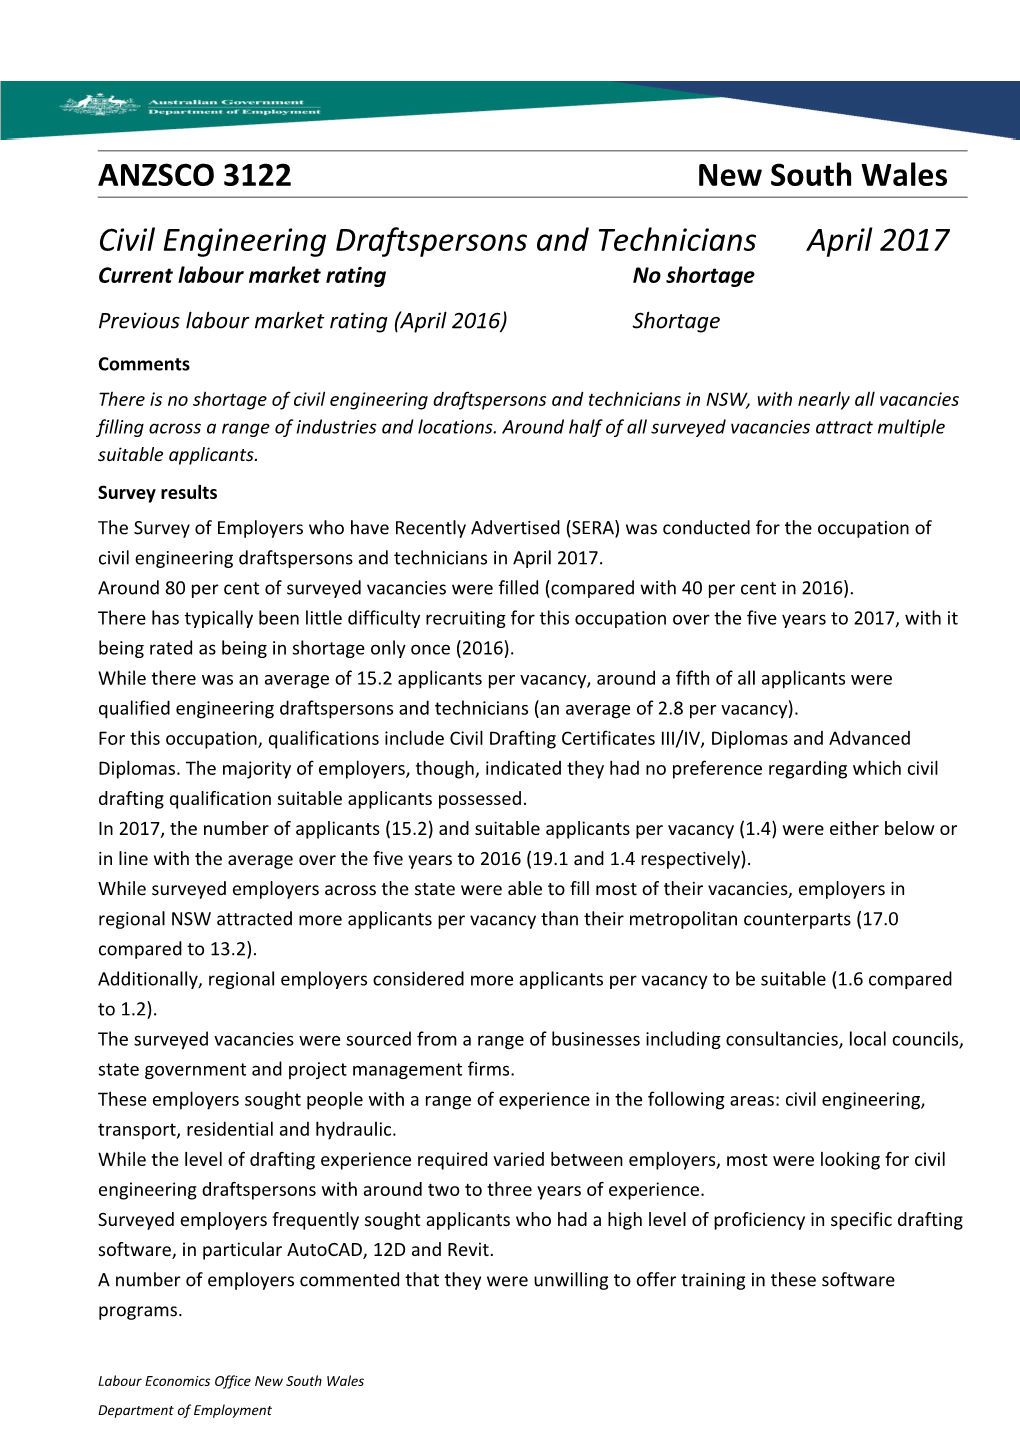 Civil Engineering Draftspersons and Technicians New South Wales